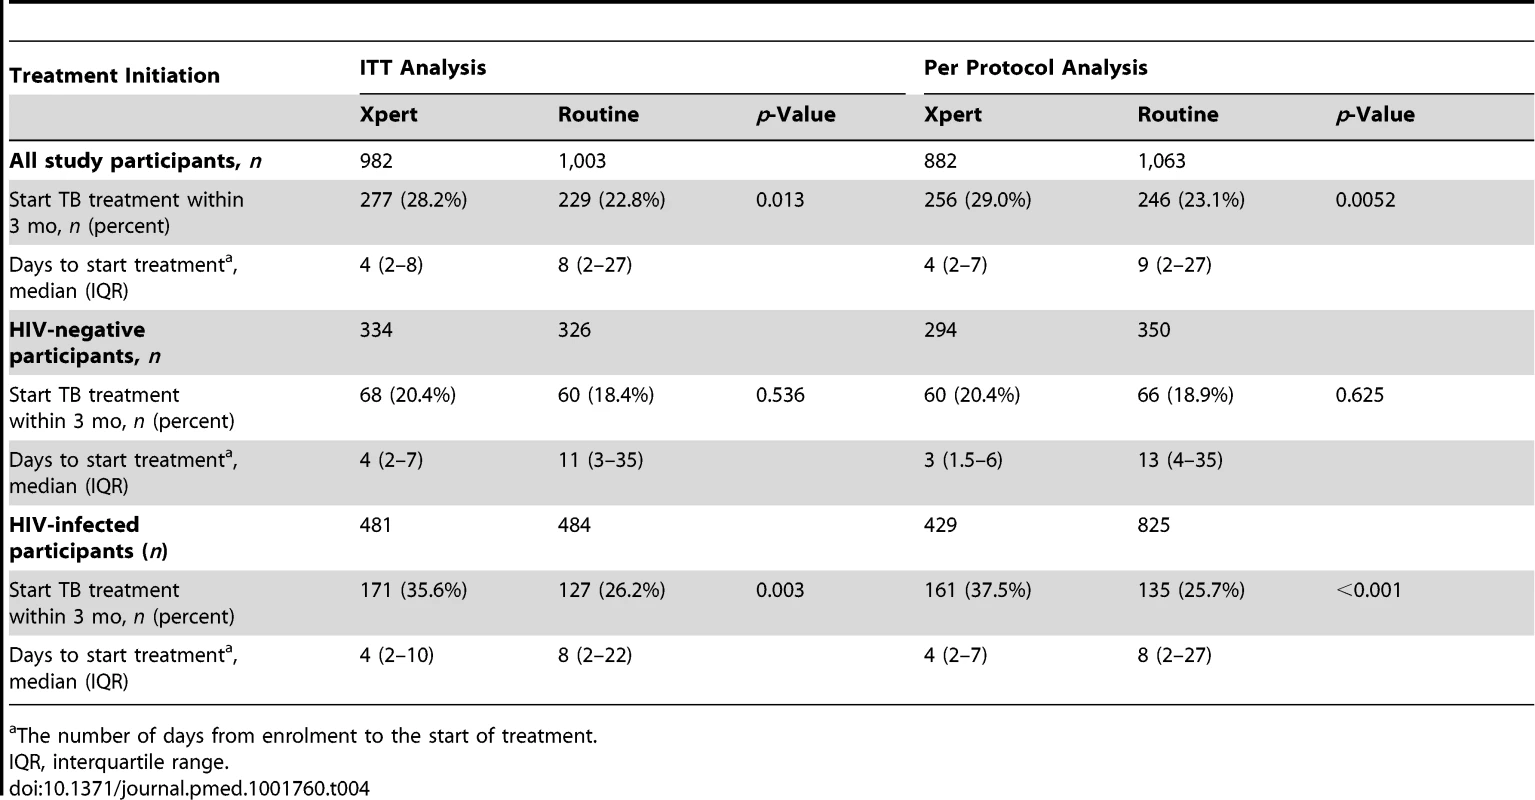 TB treatment initiation, overall and by HIV status, in the Xpert and routine arms for both the ITT and per protocol analyses.